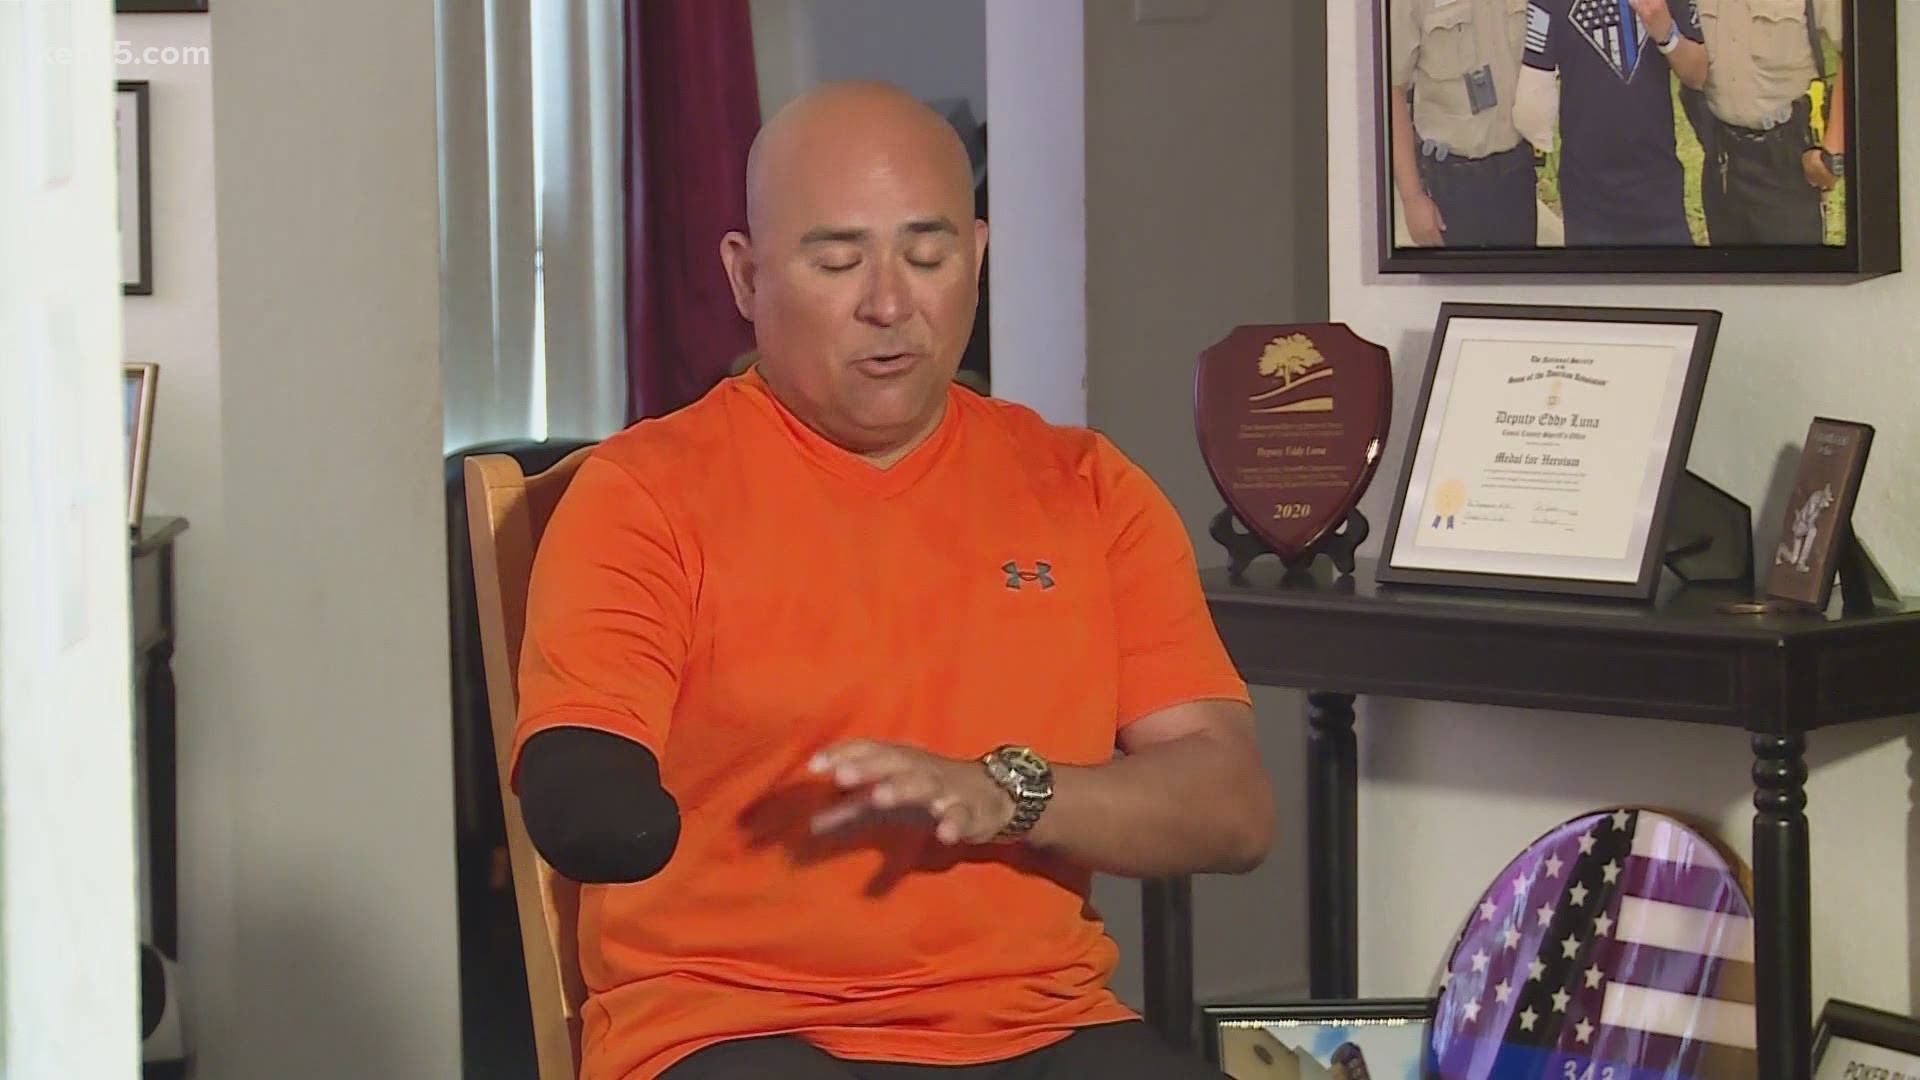 Eddy Luna nearly lost his entire right arm as a result of the shooting. Now, some months later, he's preparing to get used to a new prosthetic limb.